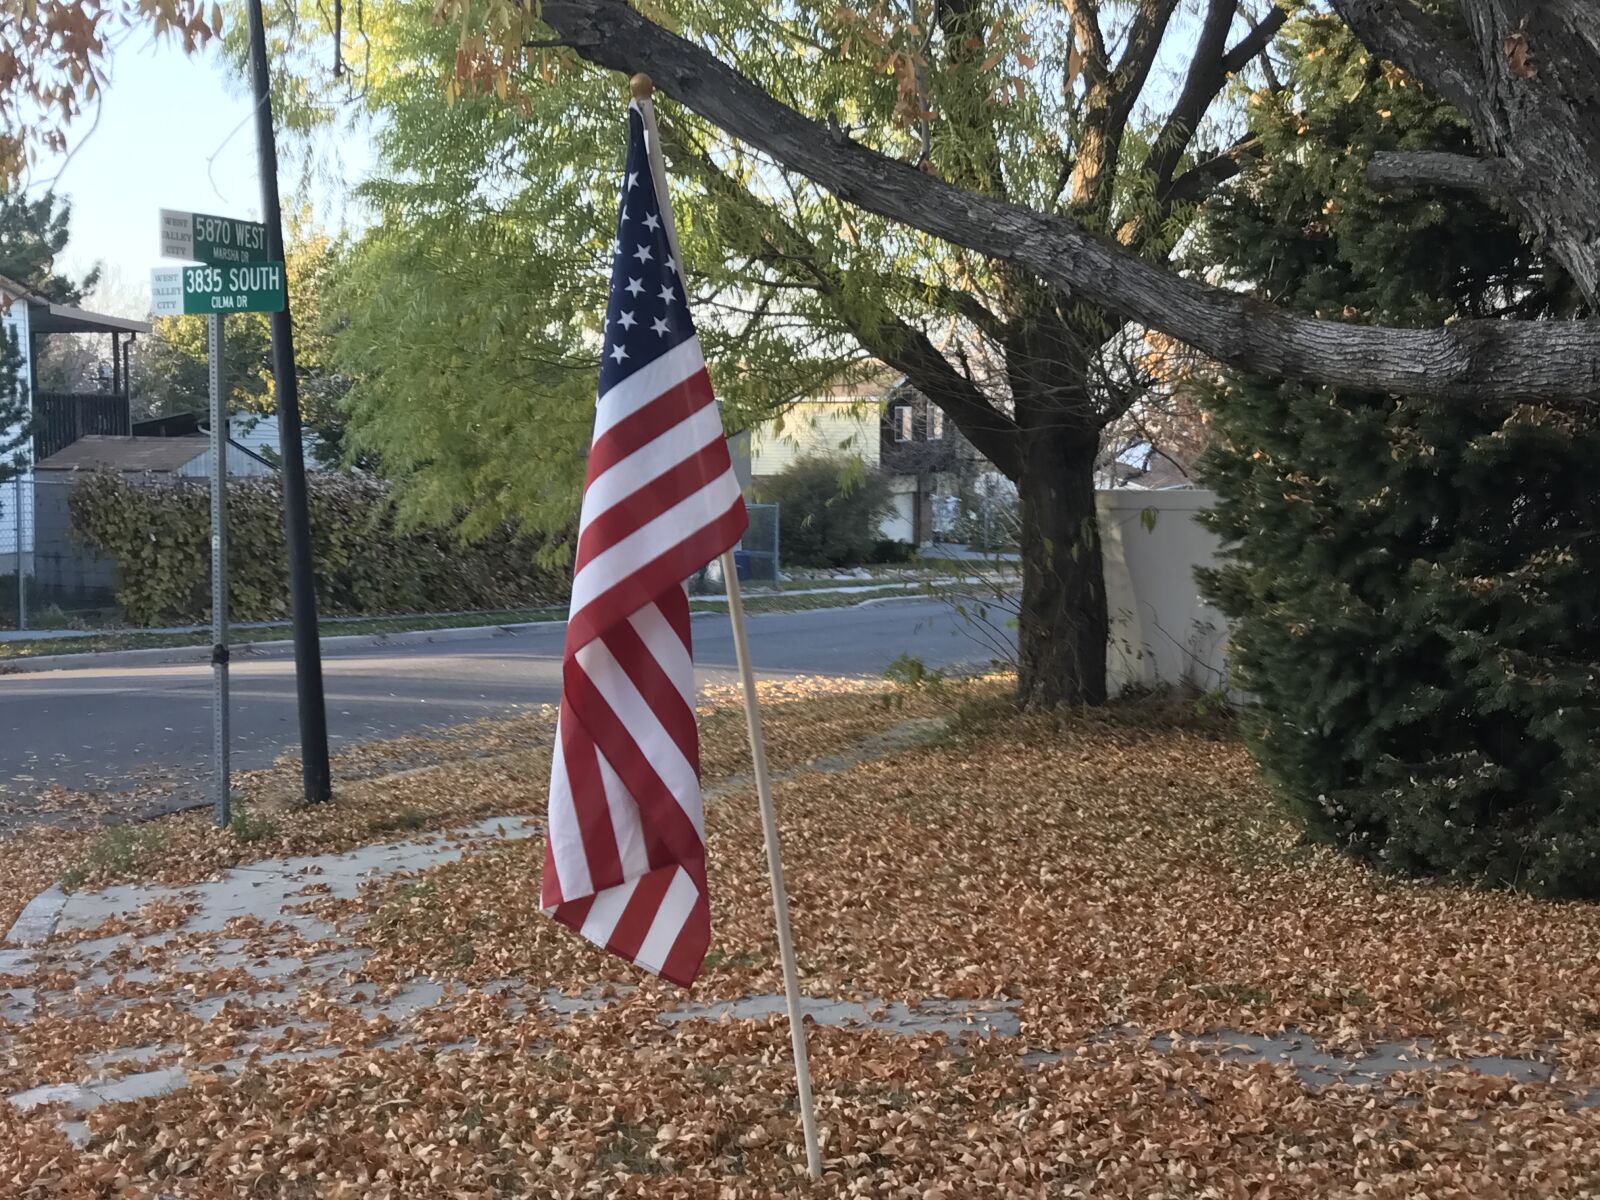 iPhone 7 Plus back iSight Duo camera 3.99mm f/1.8 sample photo. American, flag, fall photography